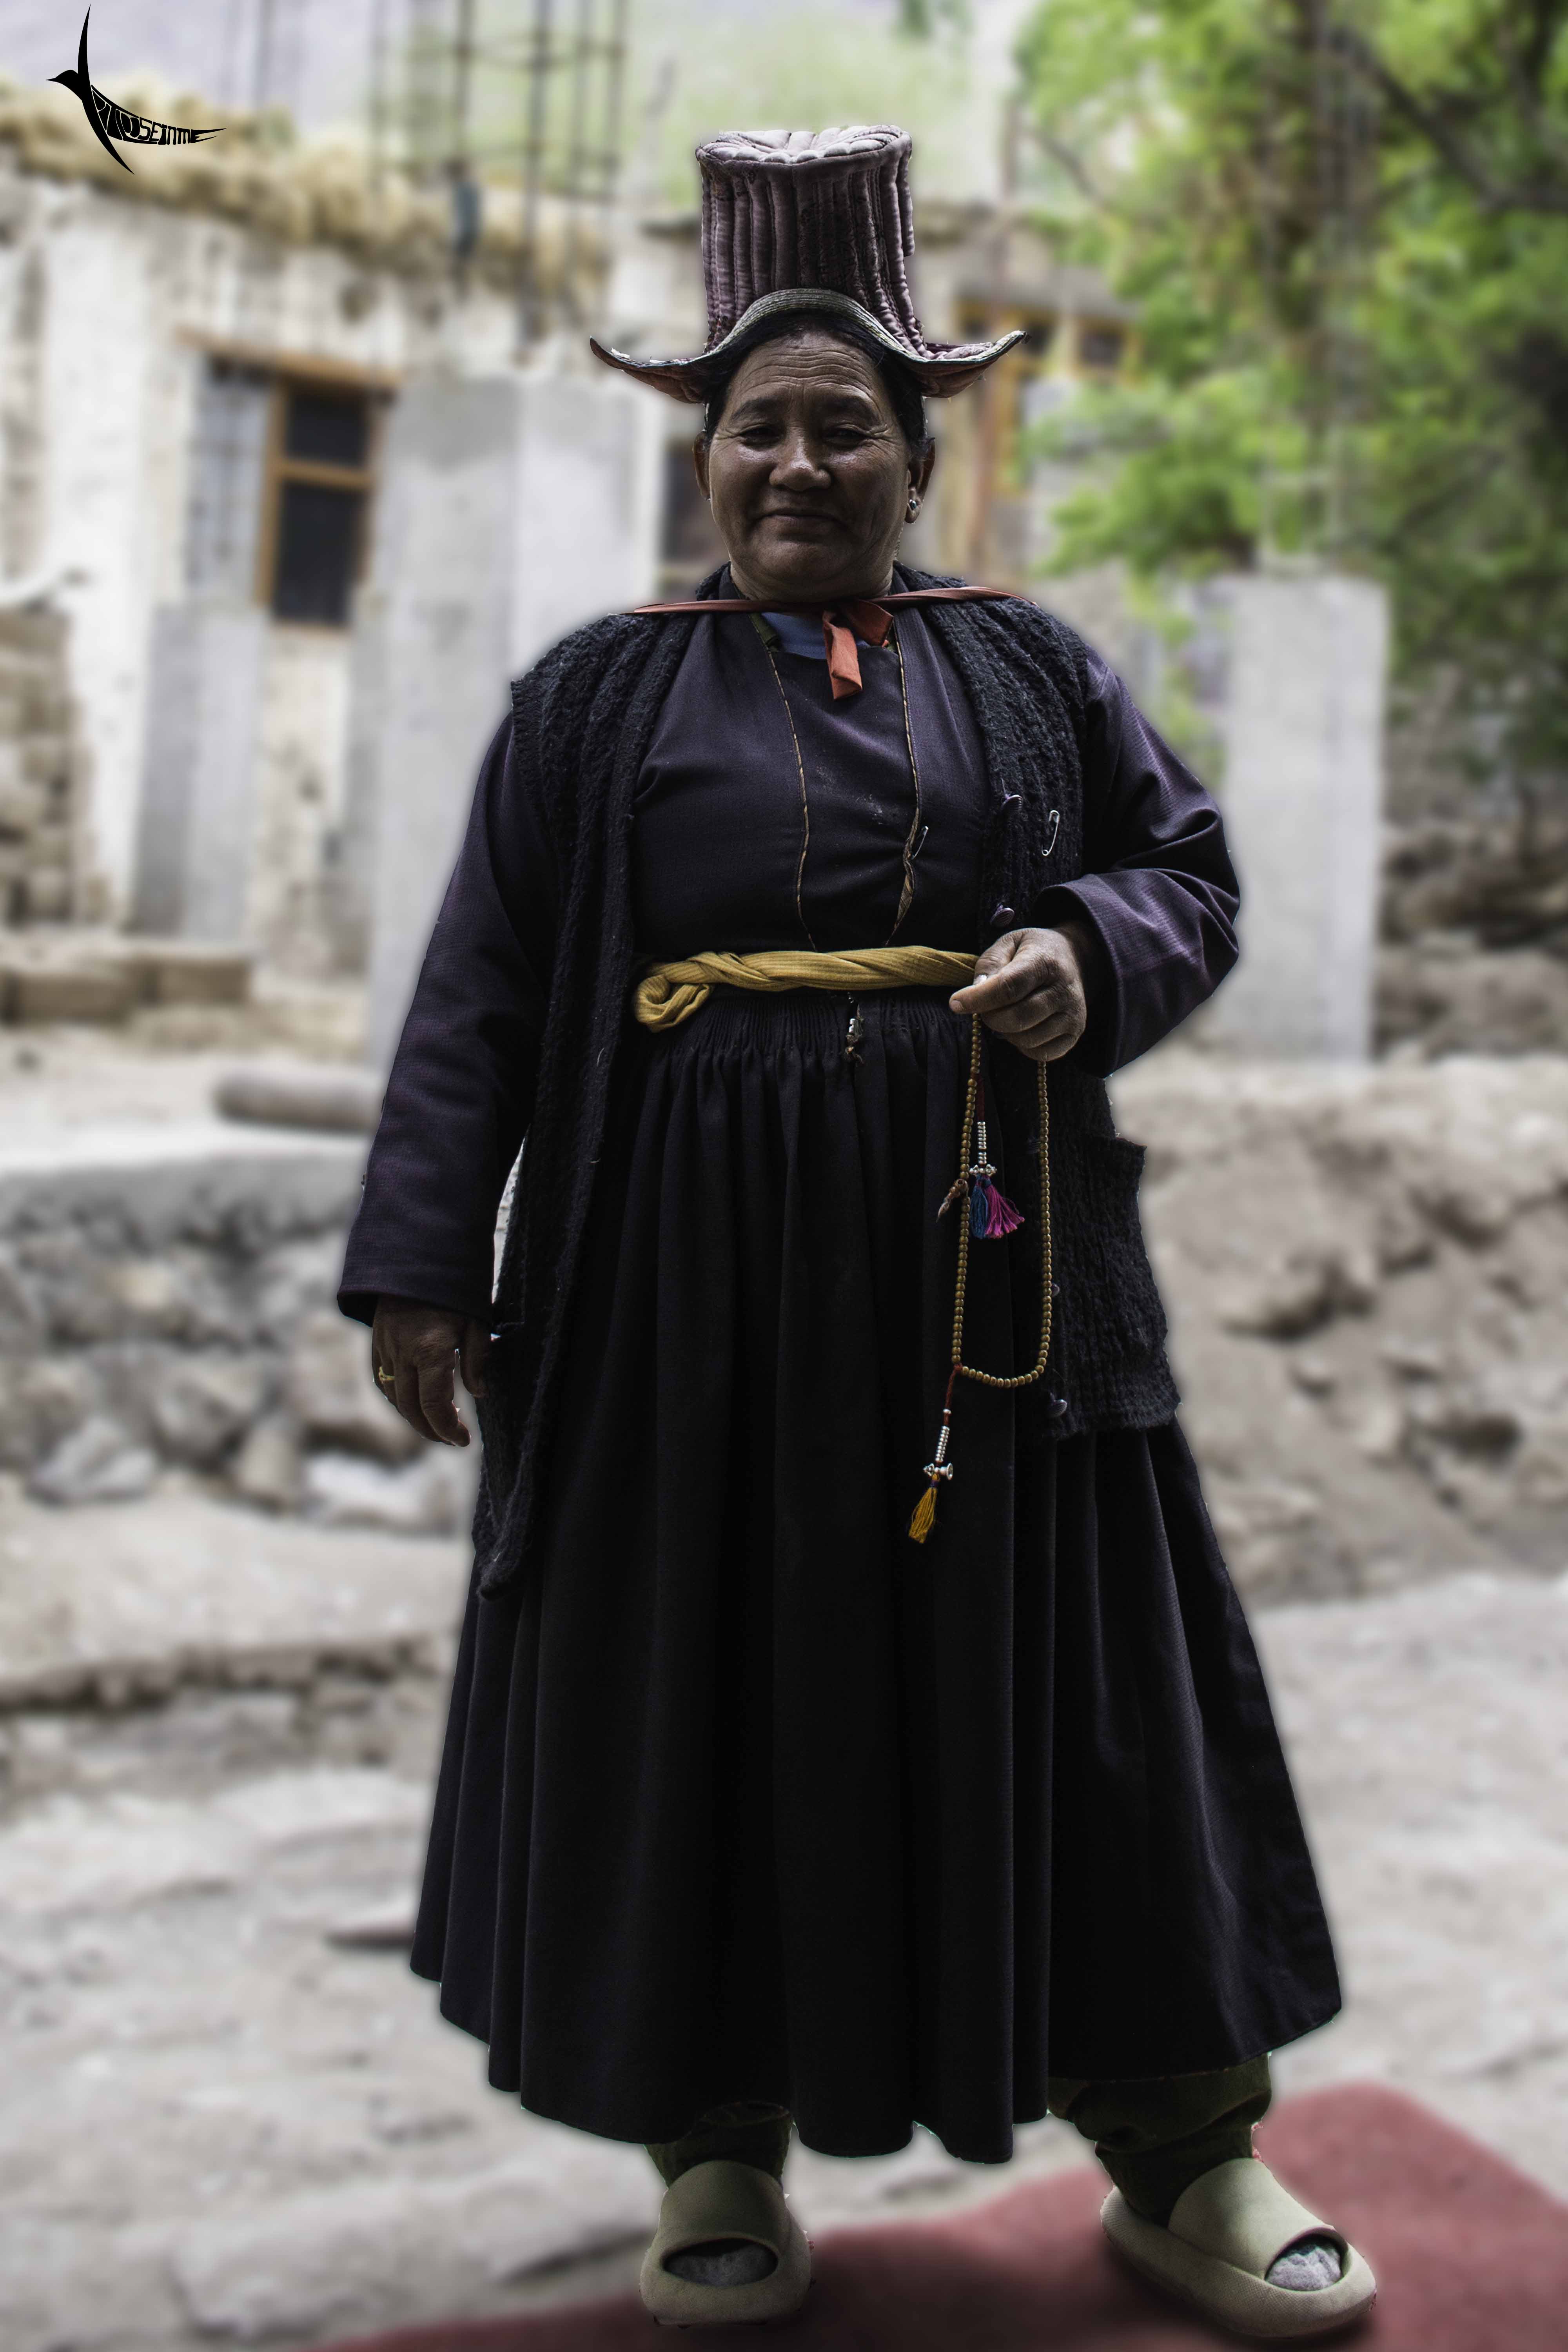 The lady happily posed for me near Alchi monastery